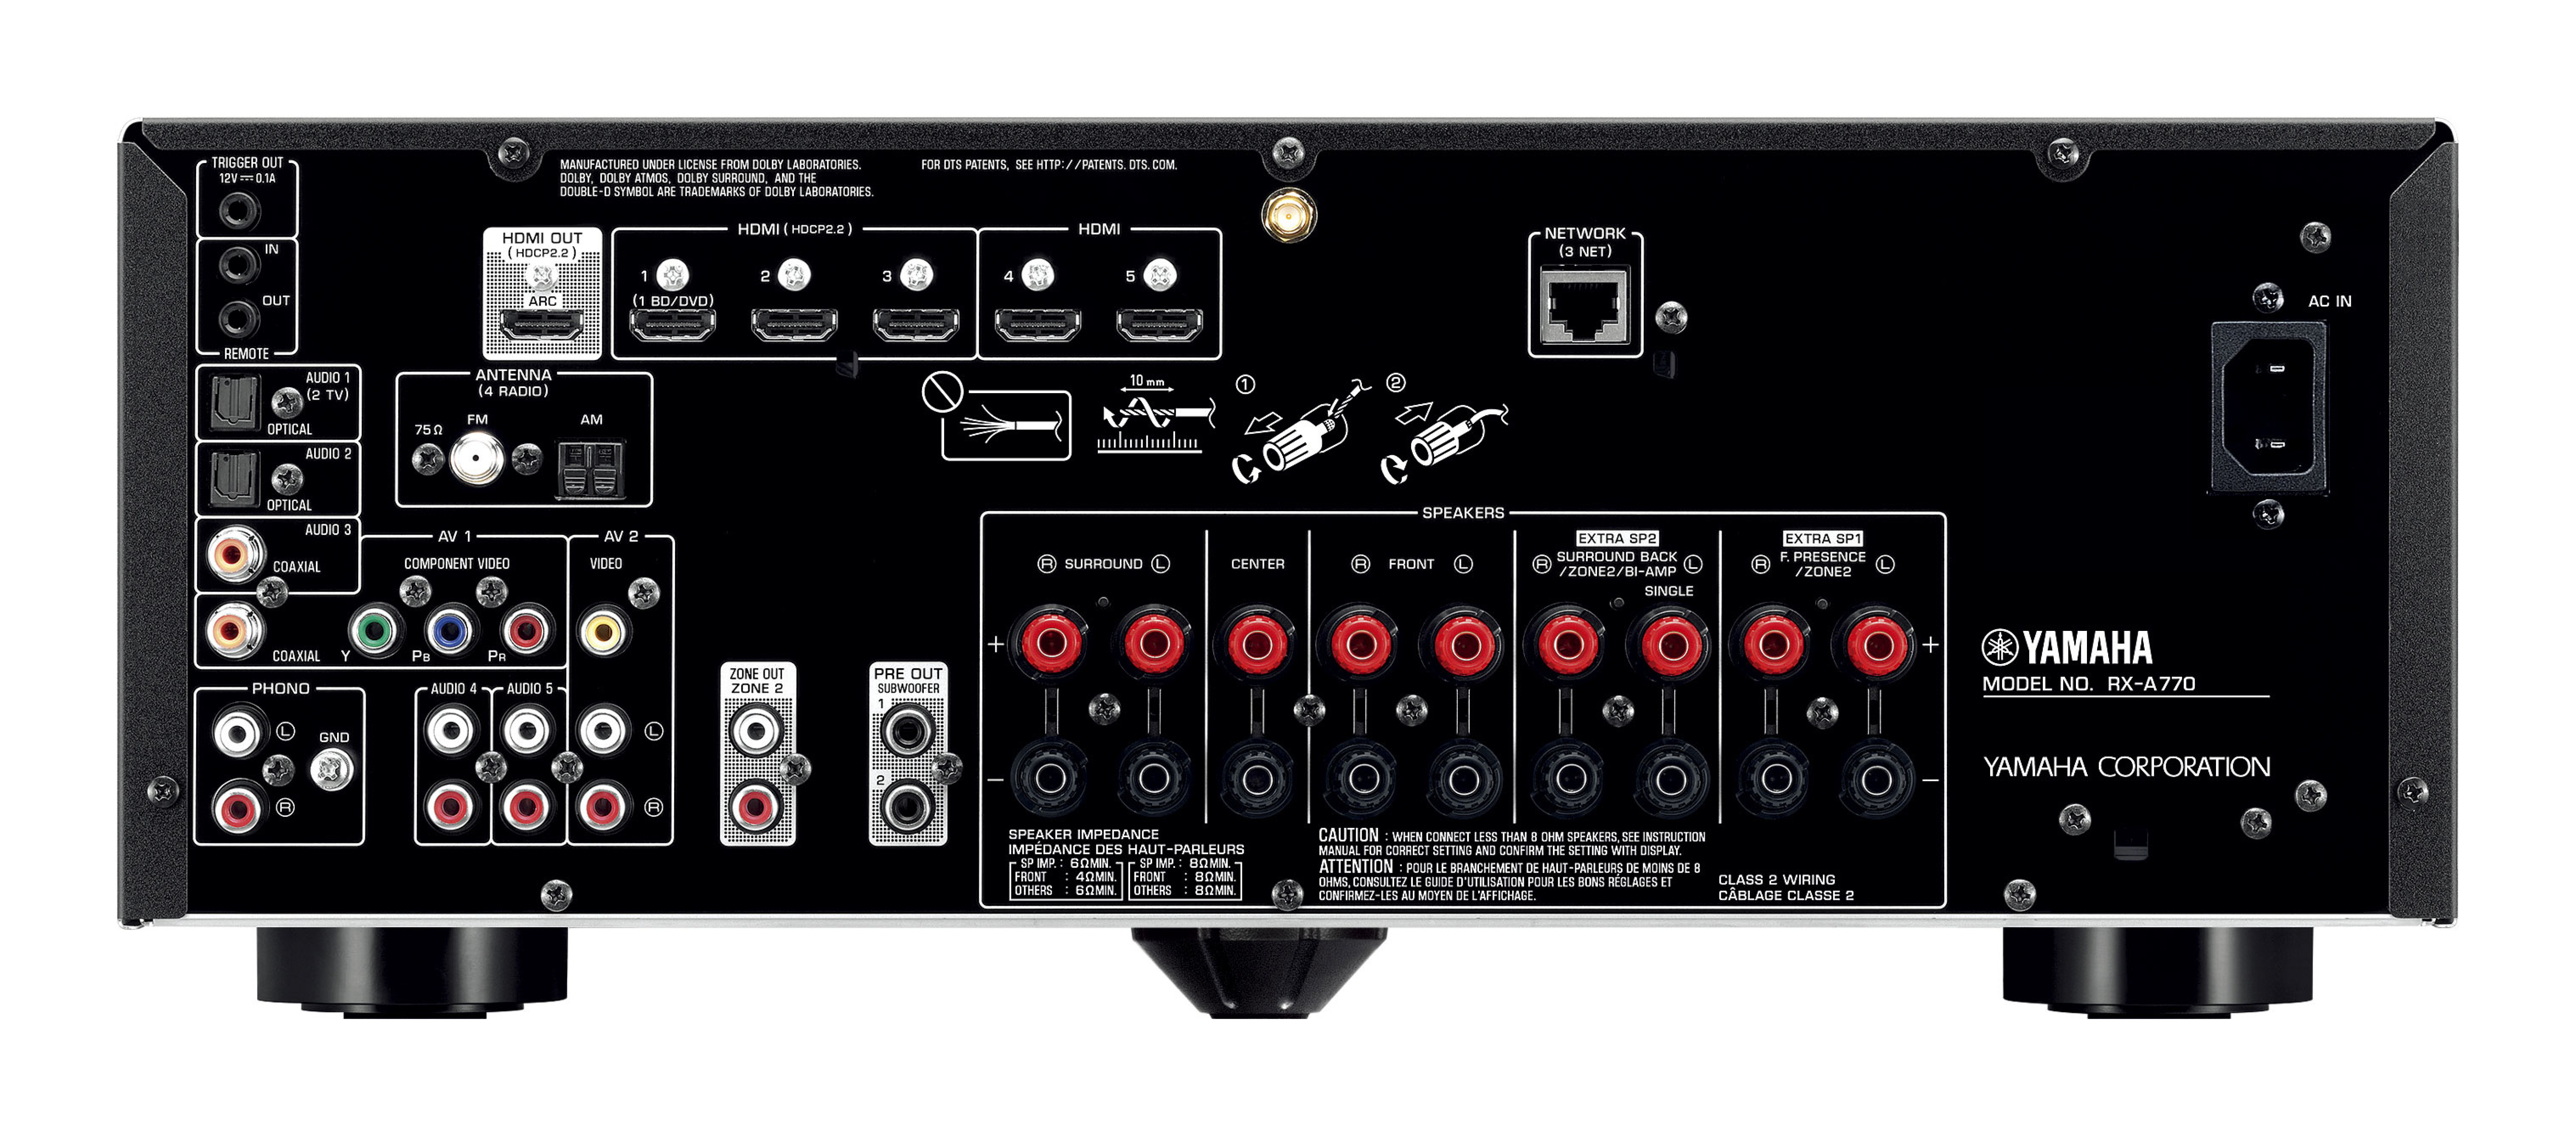 YAMAHA RX-A770 IN STORE PURCHASE ONLY